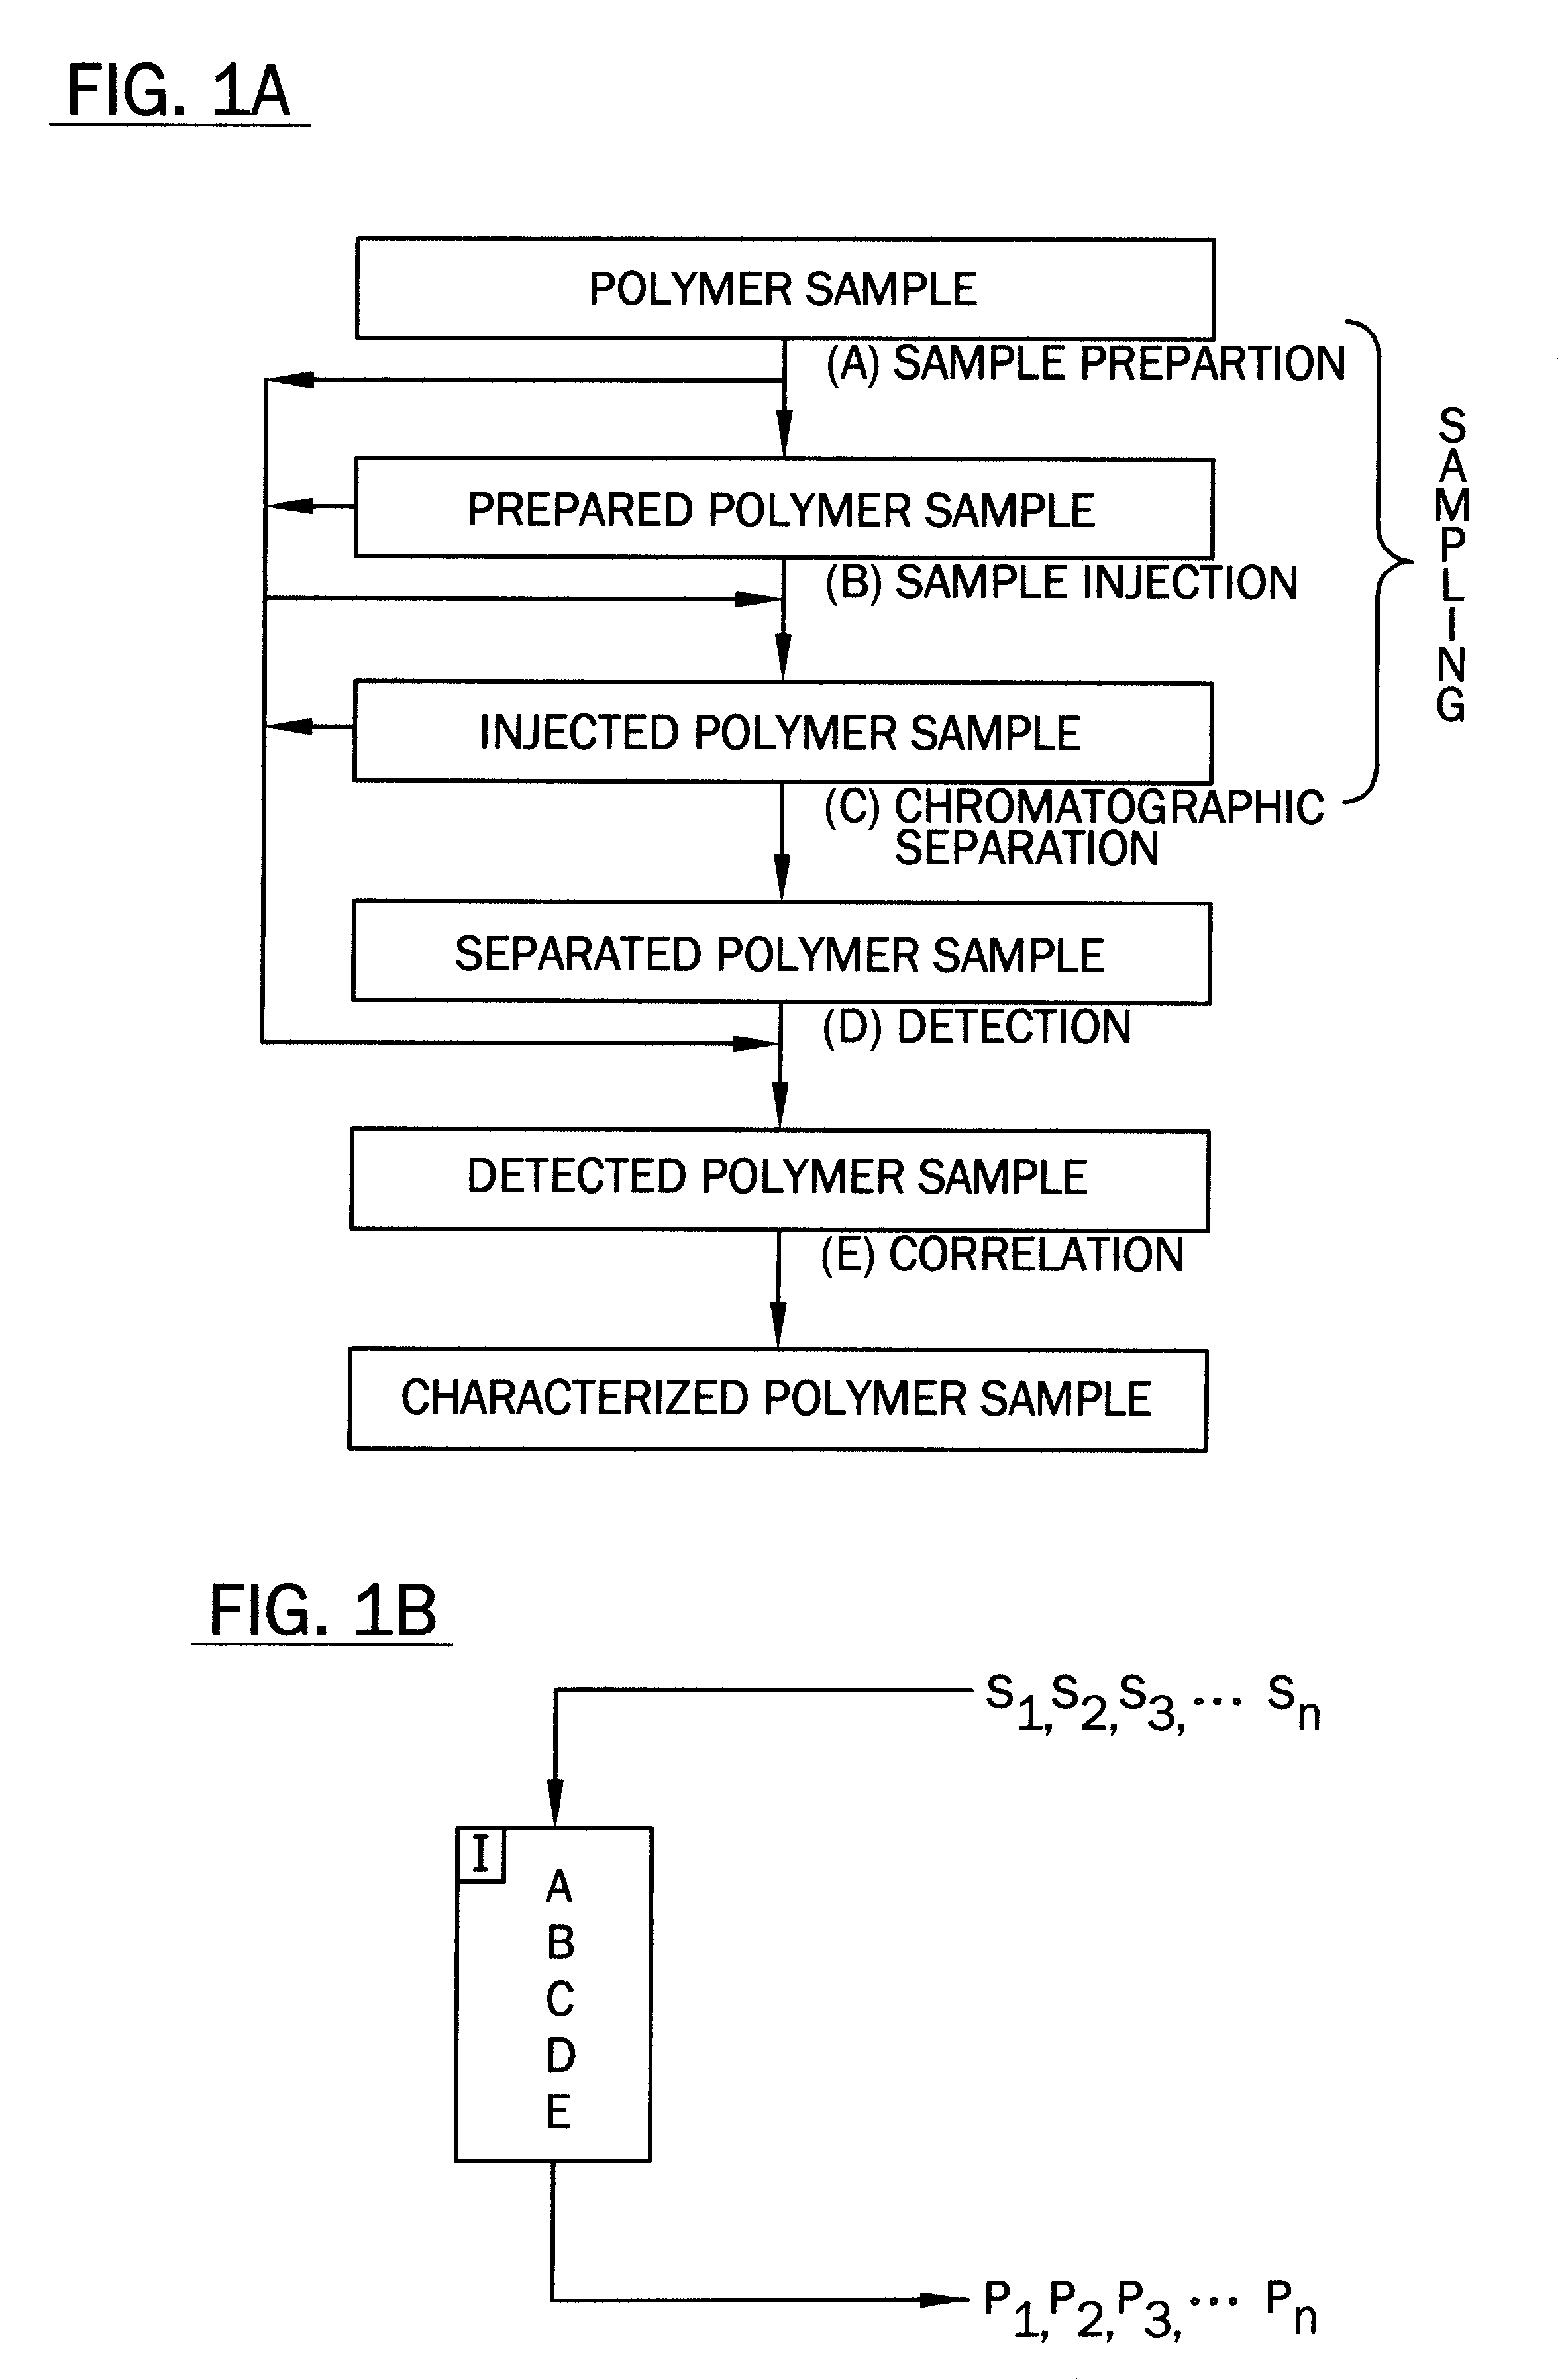 Fiber optic apparatus and use thereof in combinatorial material science